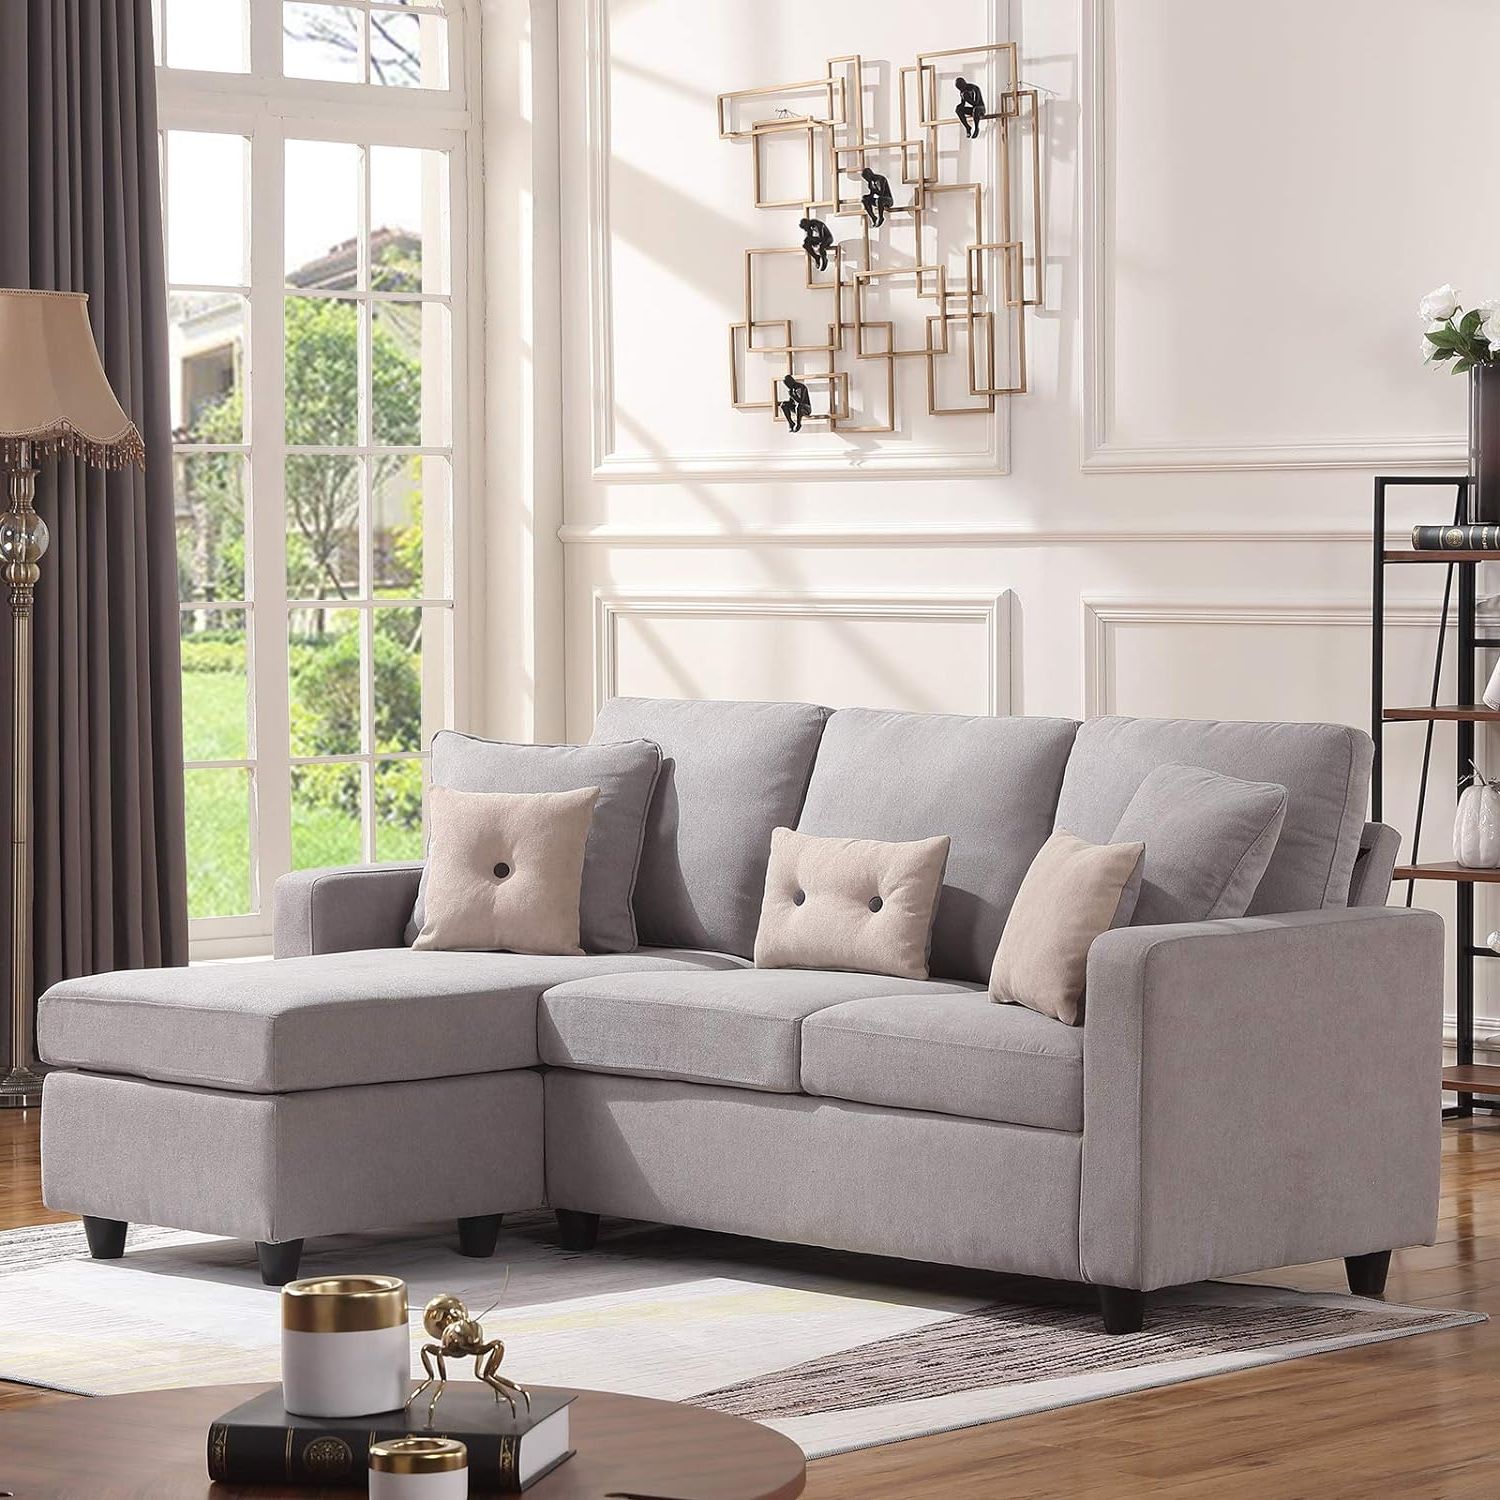 Newest Honbay Convertible Sectional Sofa Couch, L Shaped Couch With Modern With Sofas For Small Spaces (View 12 of 15)